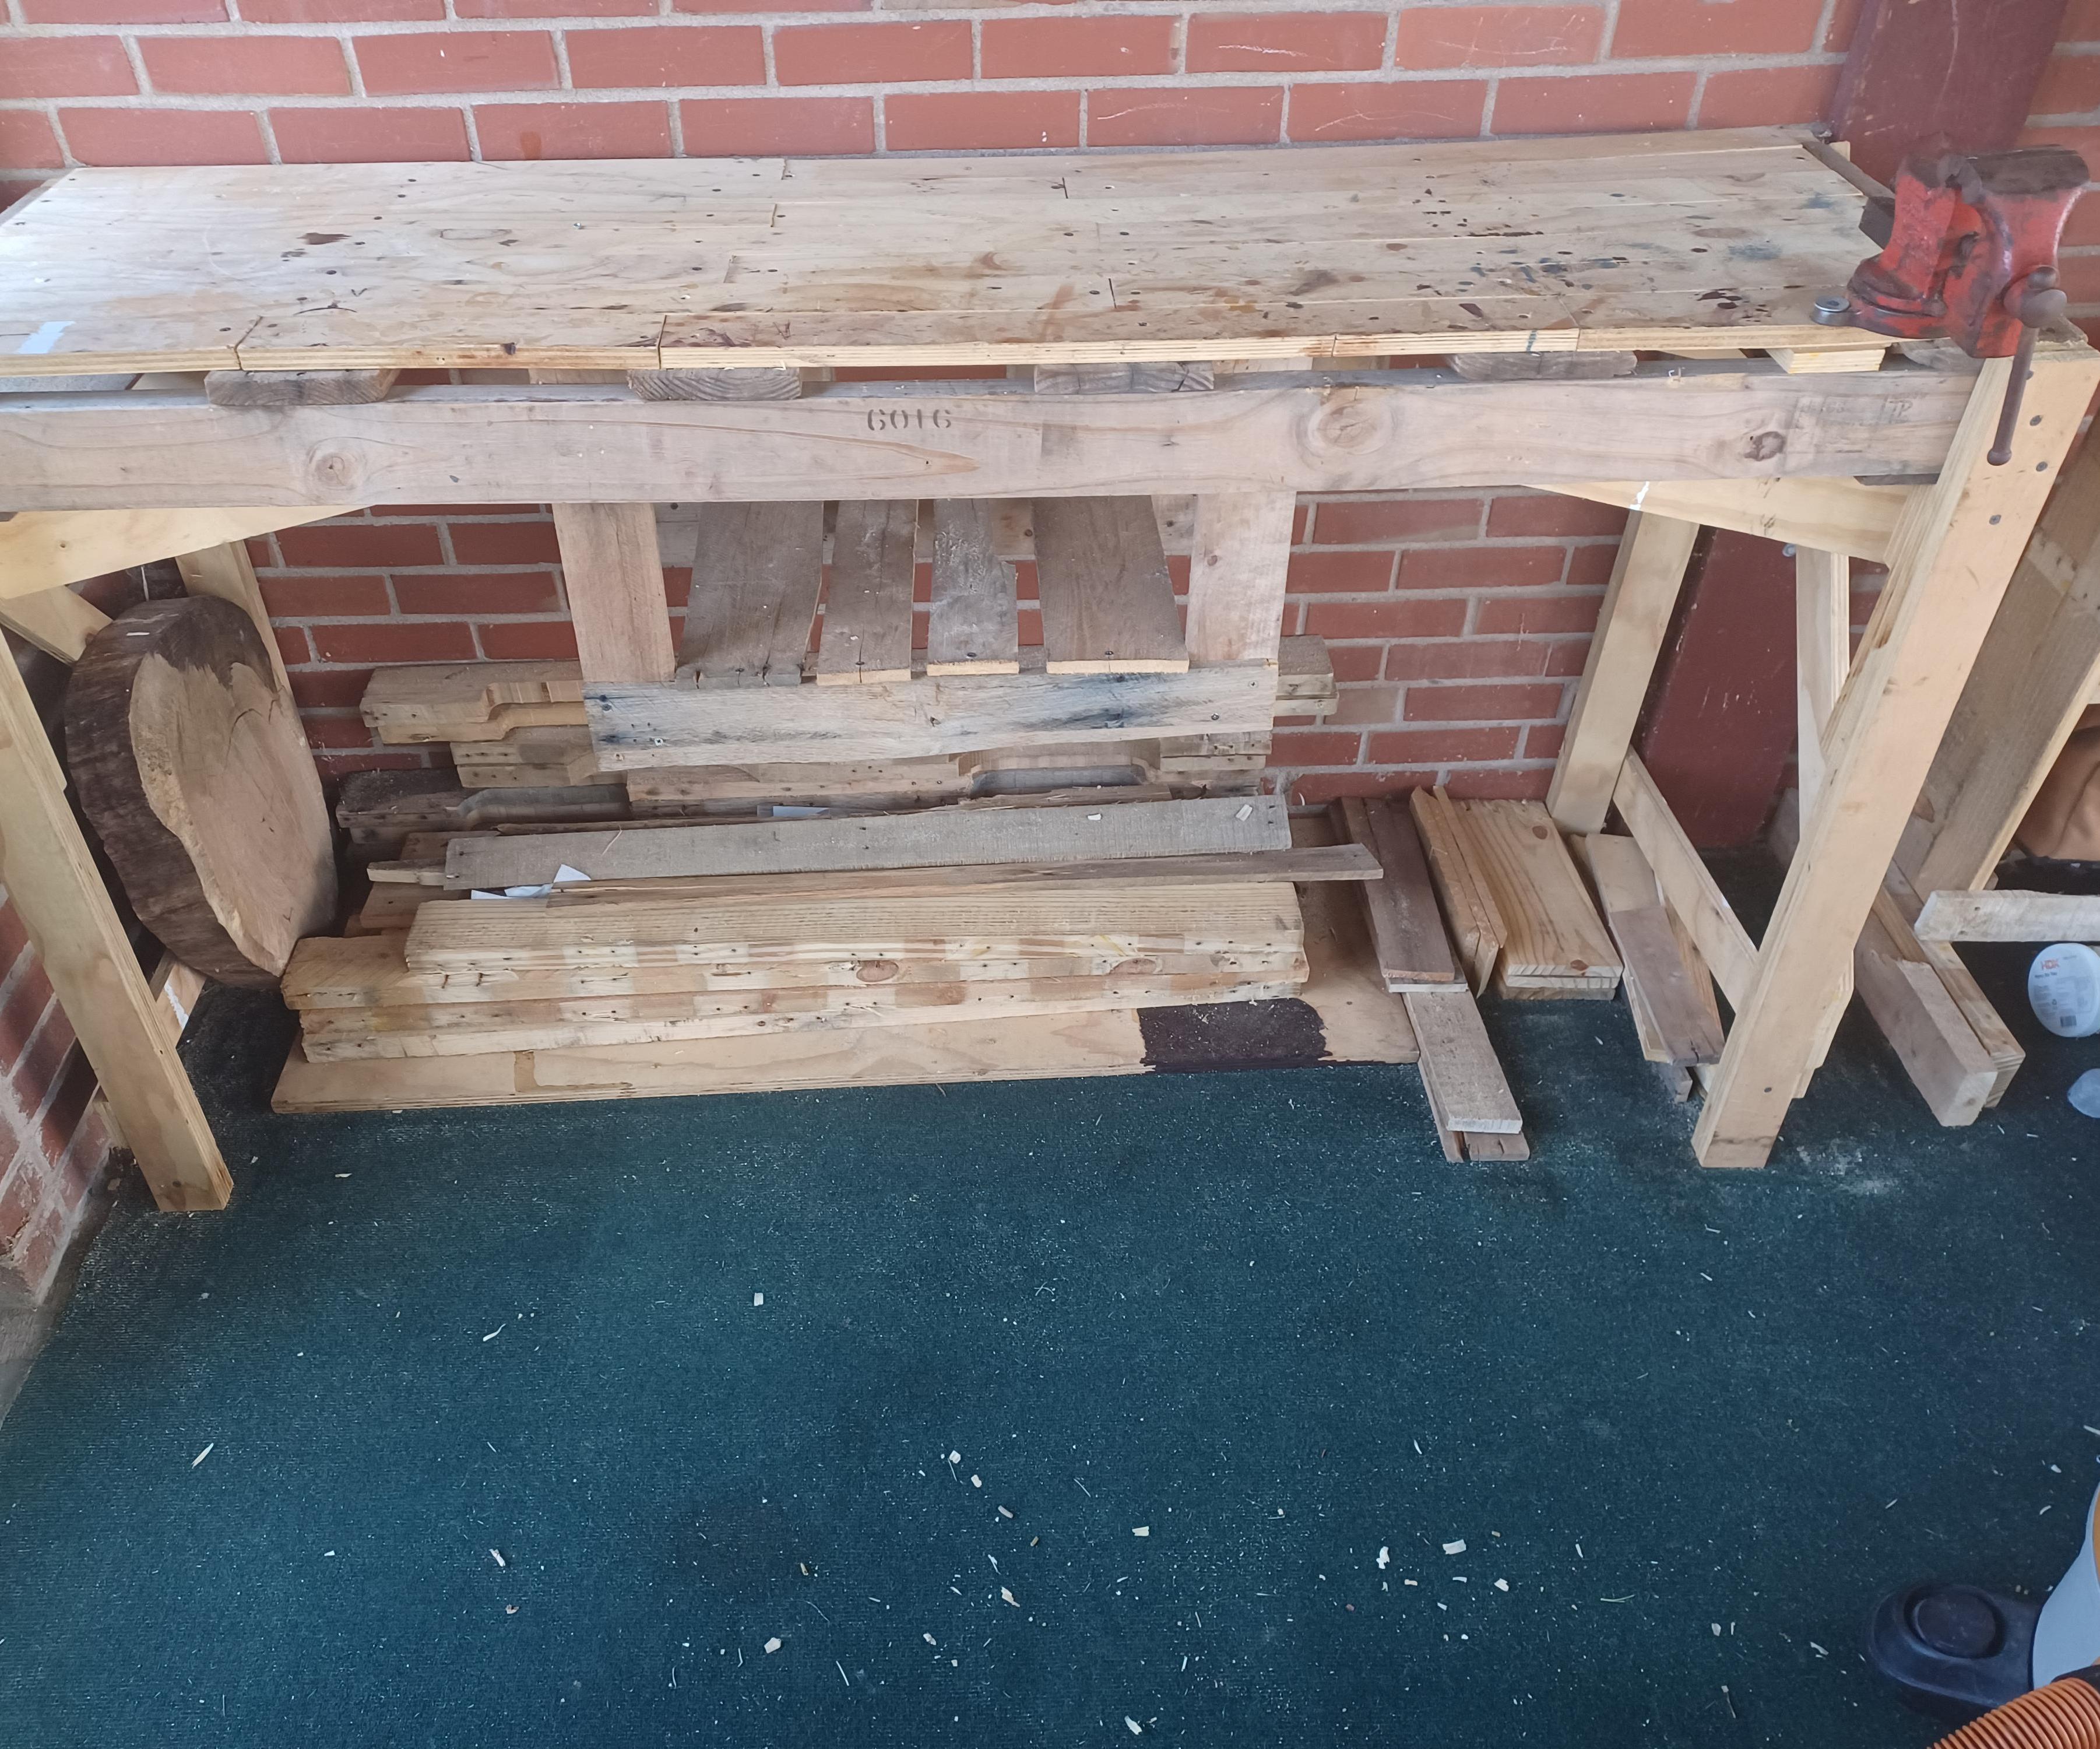 DIY Workbench From Scraps and Pallets